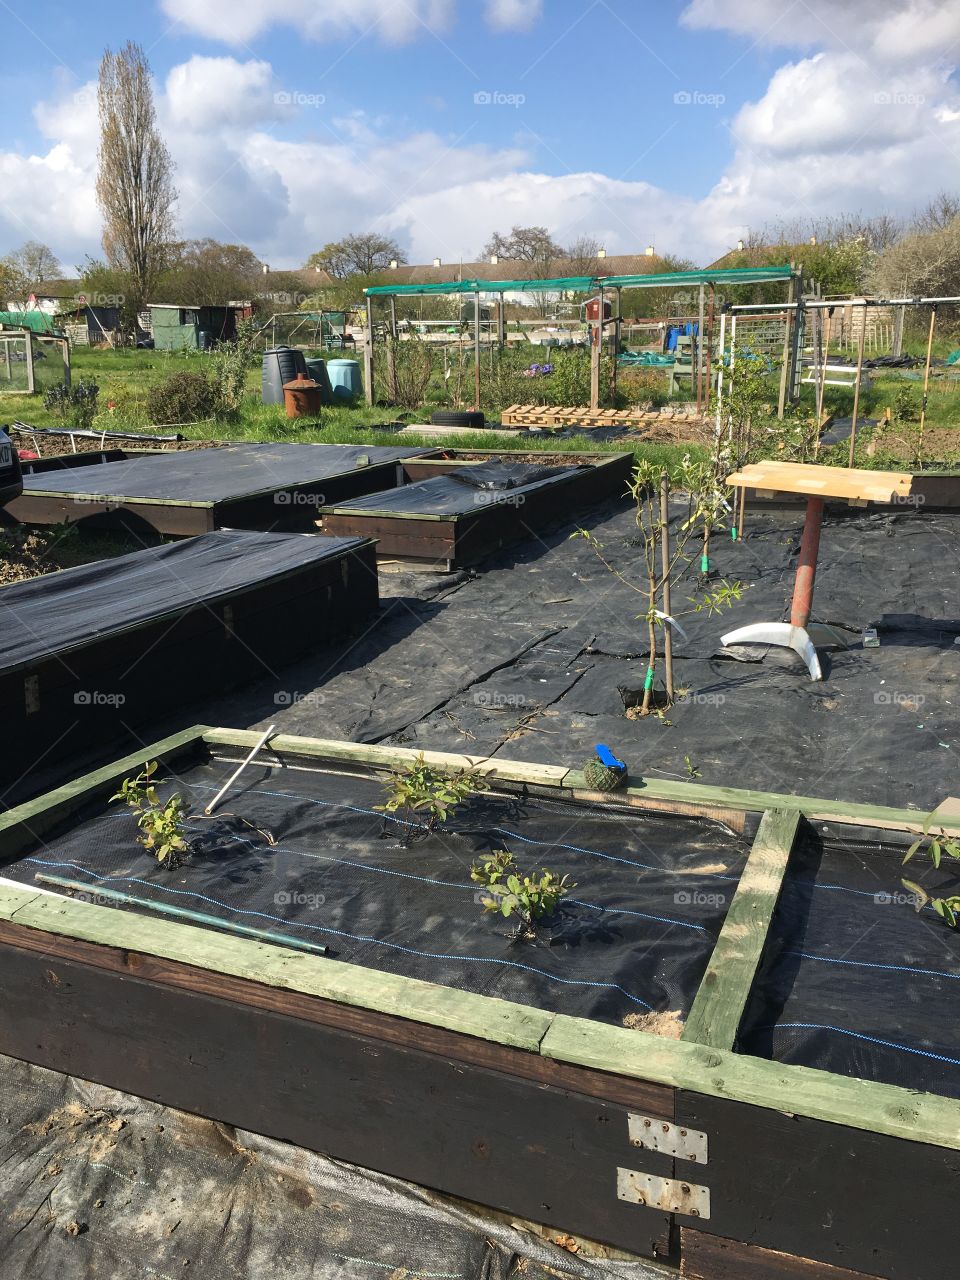 Preparing for summer at the allotment 